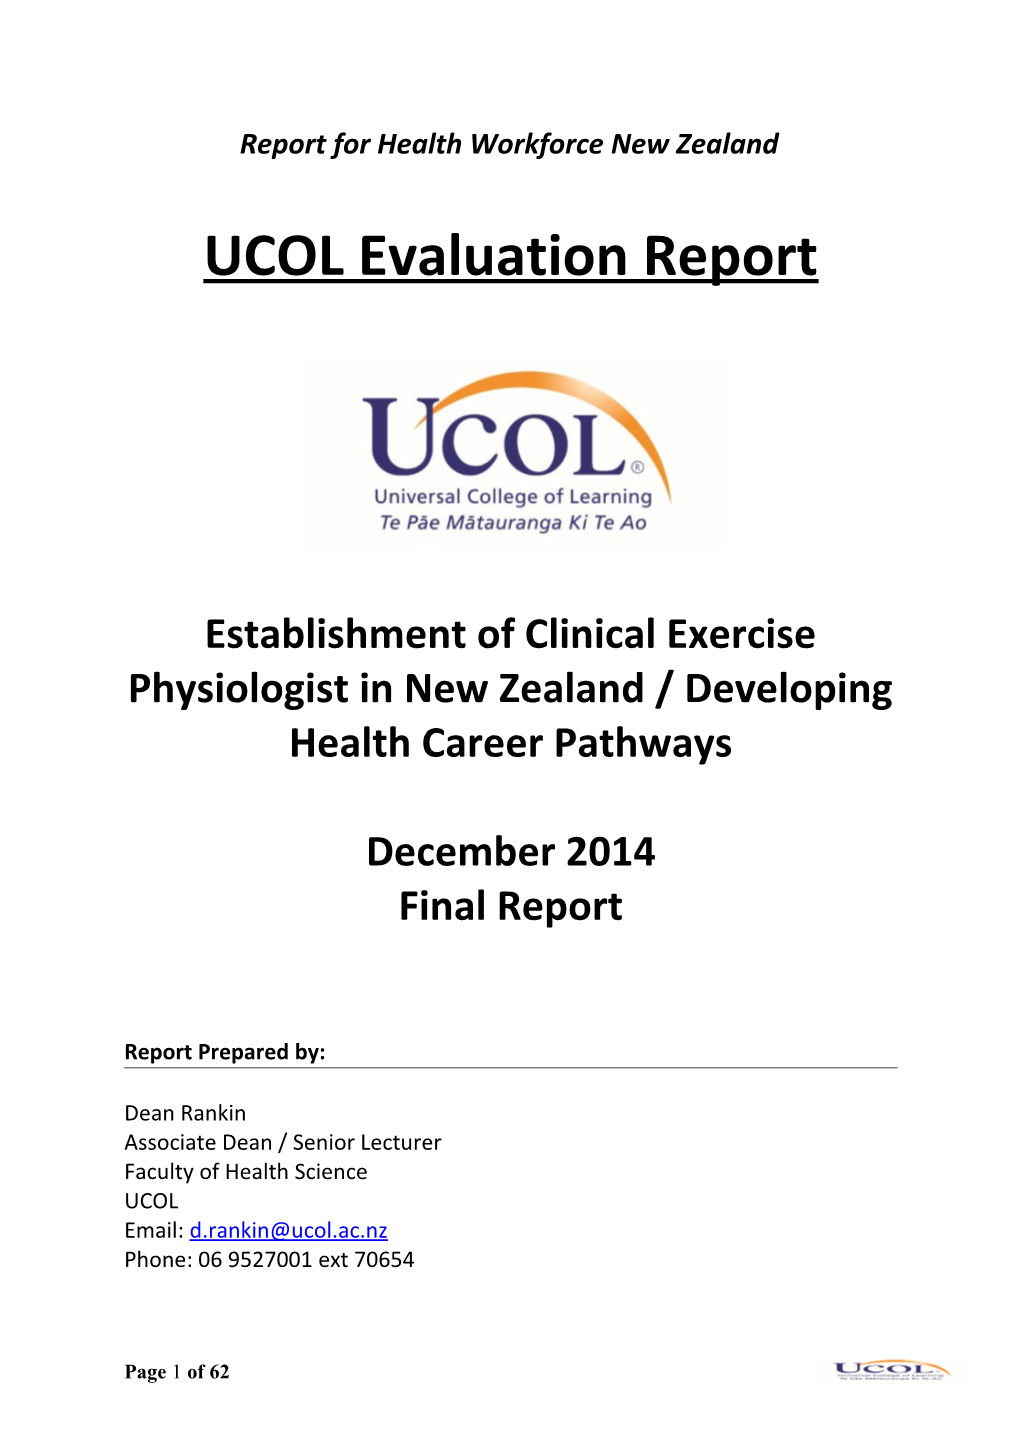 Establishment of Clinical Exercise Physiologist in New Zealand/Developing Health Career Pathways